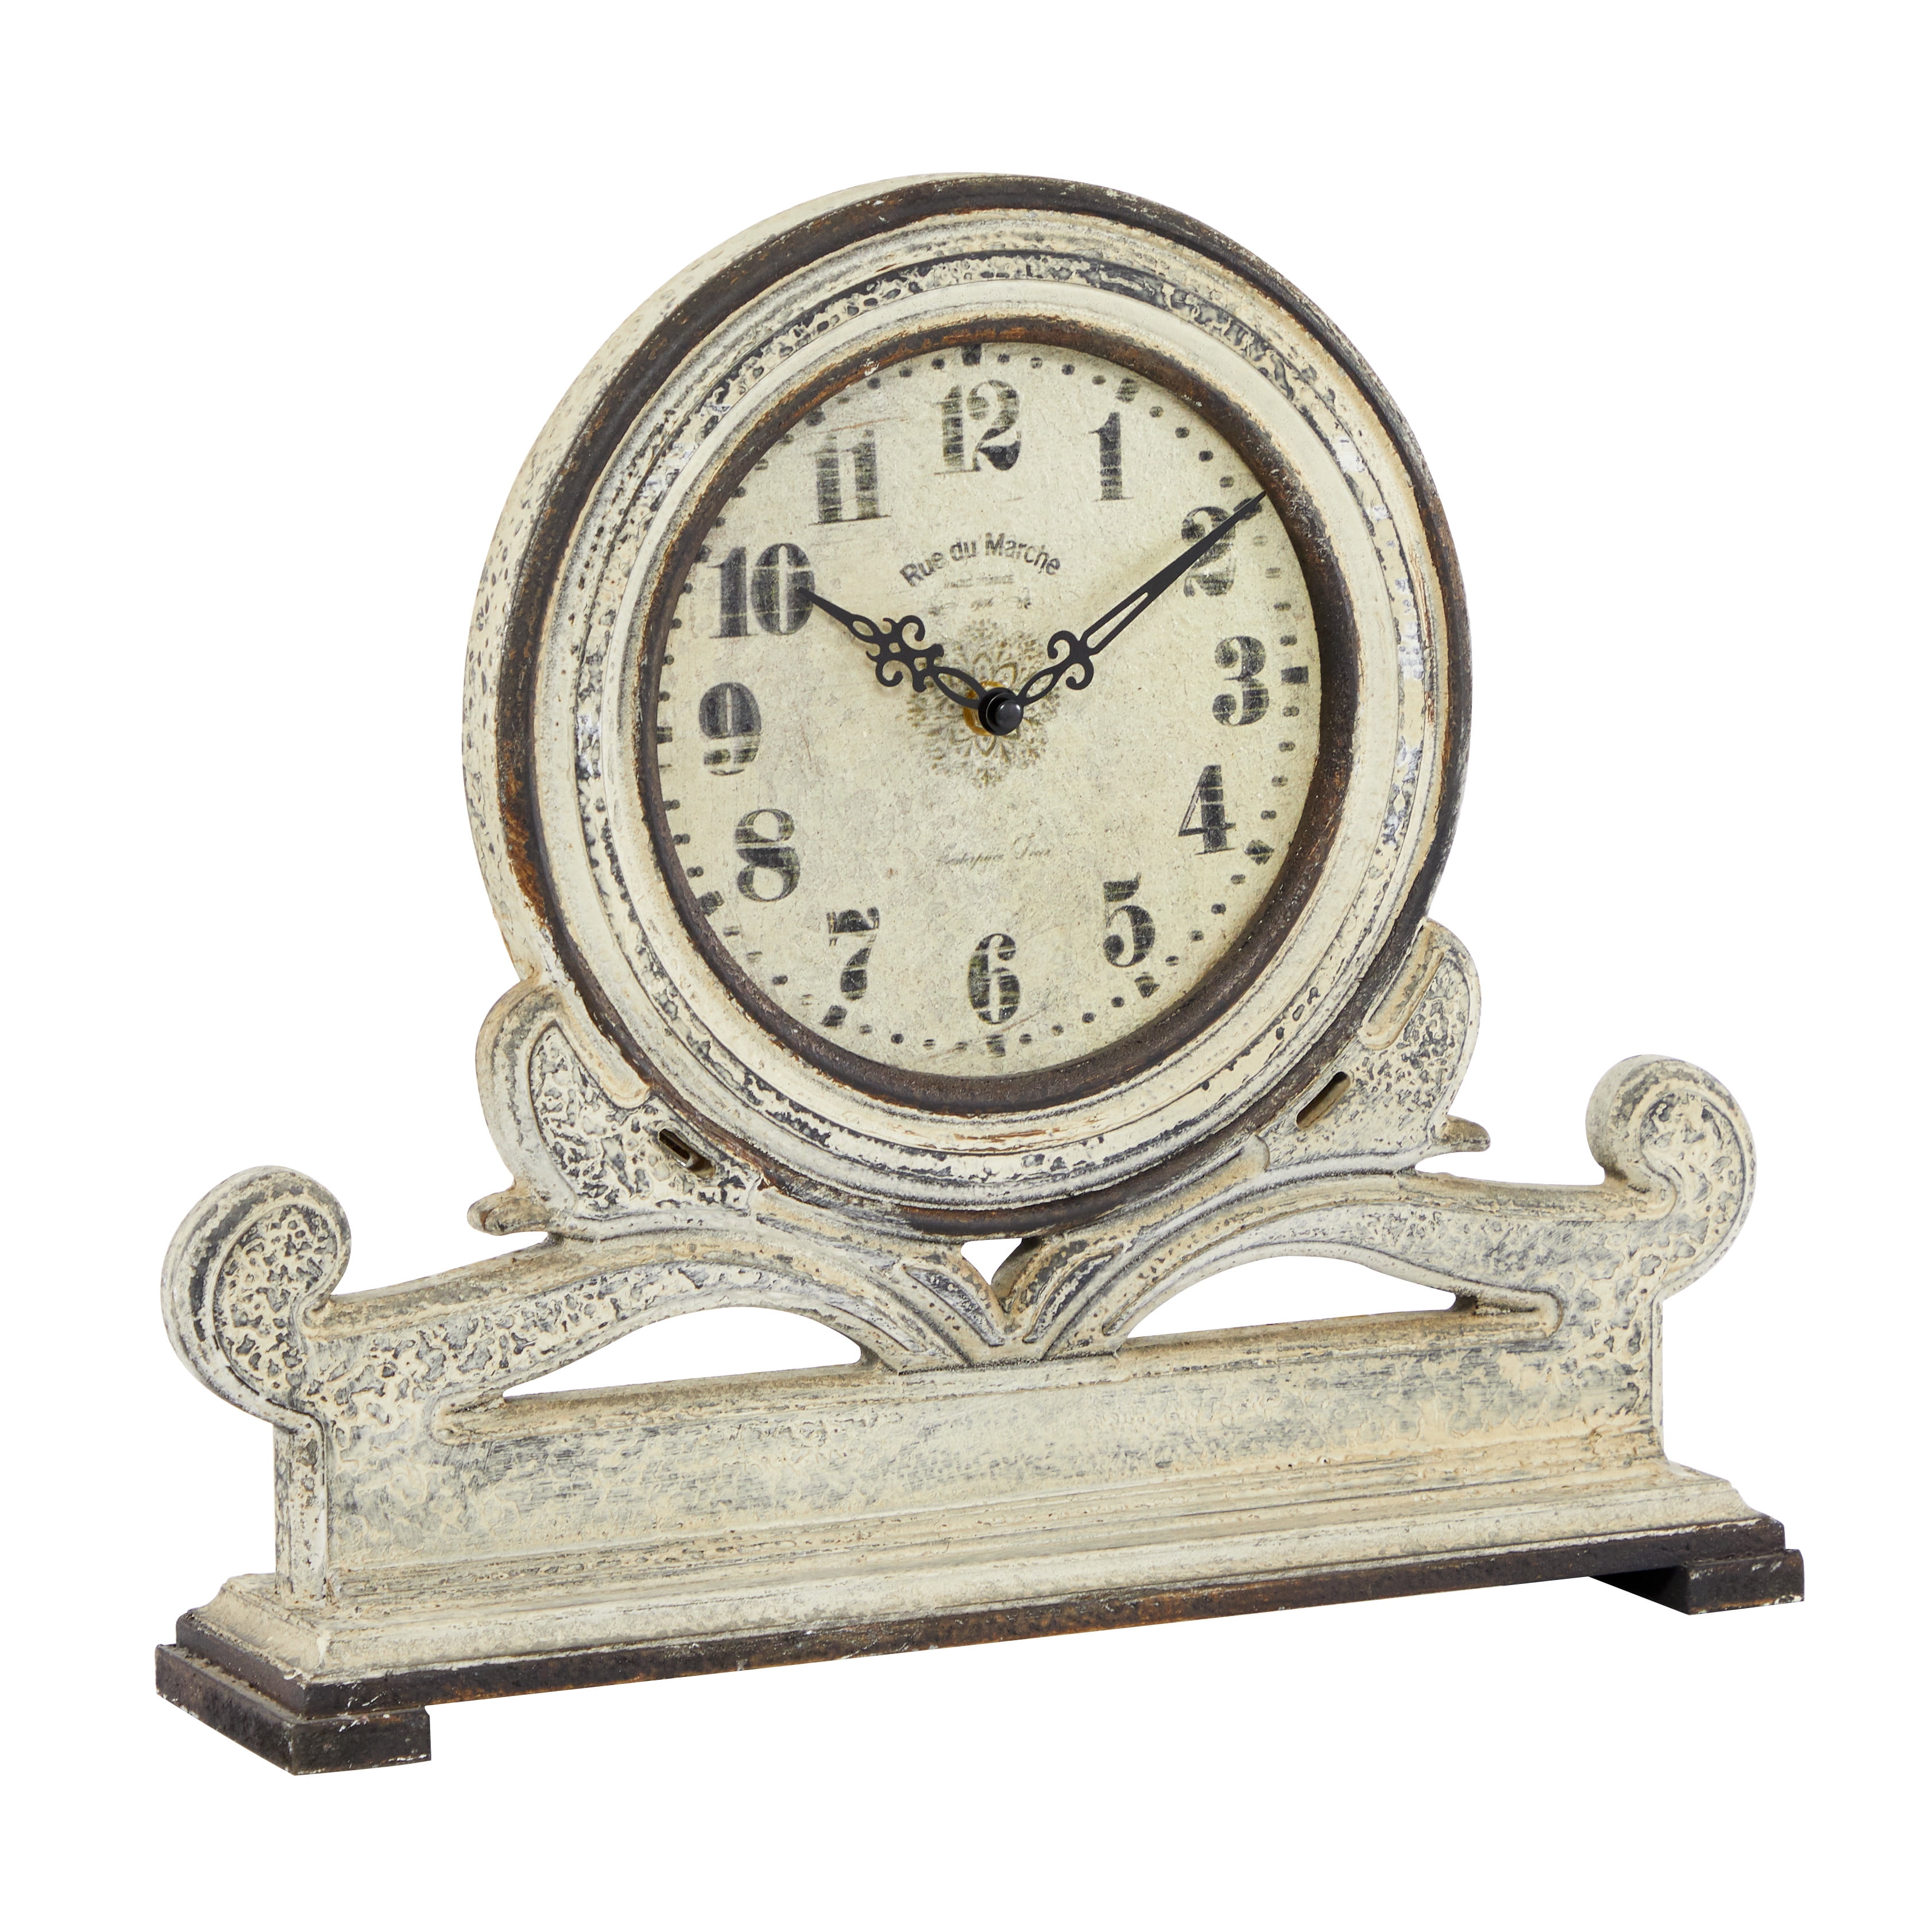 Maples FL92 Floral Table Clock